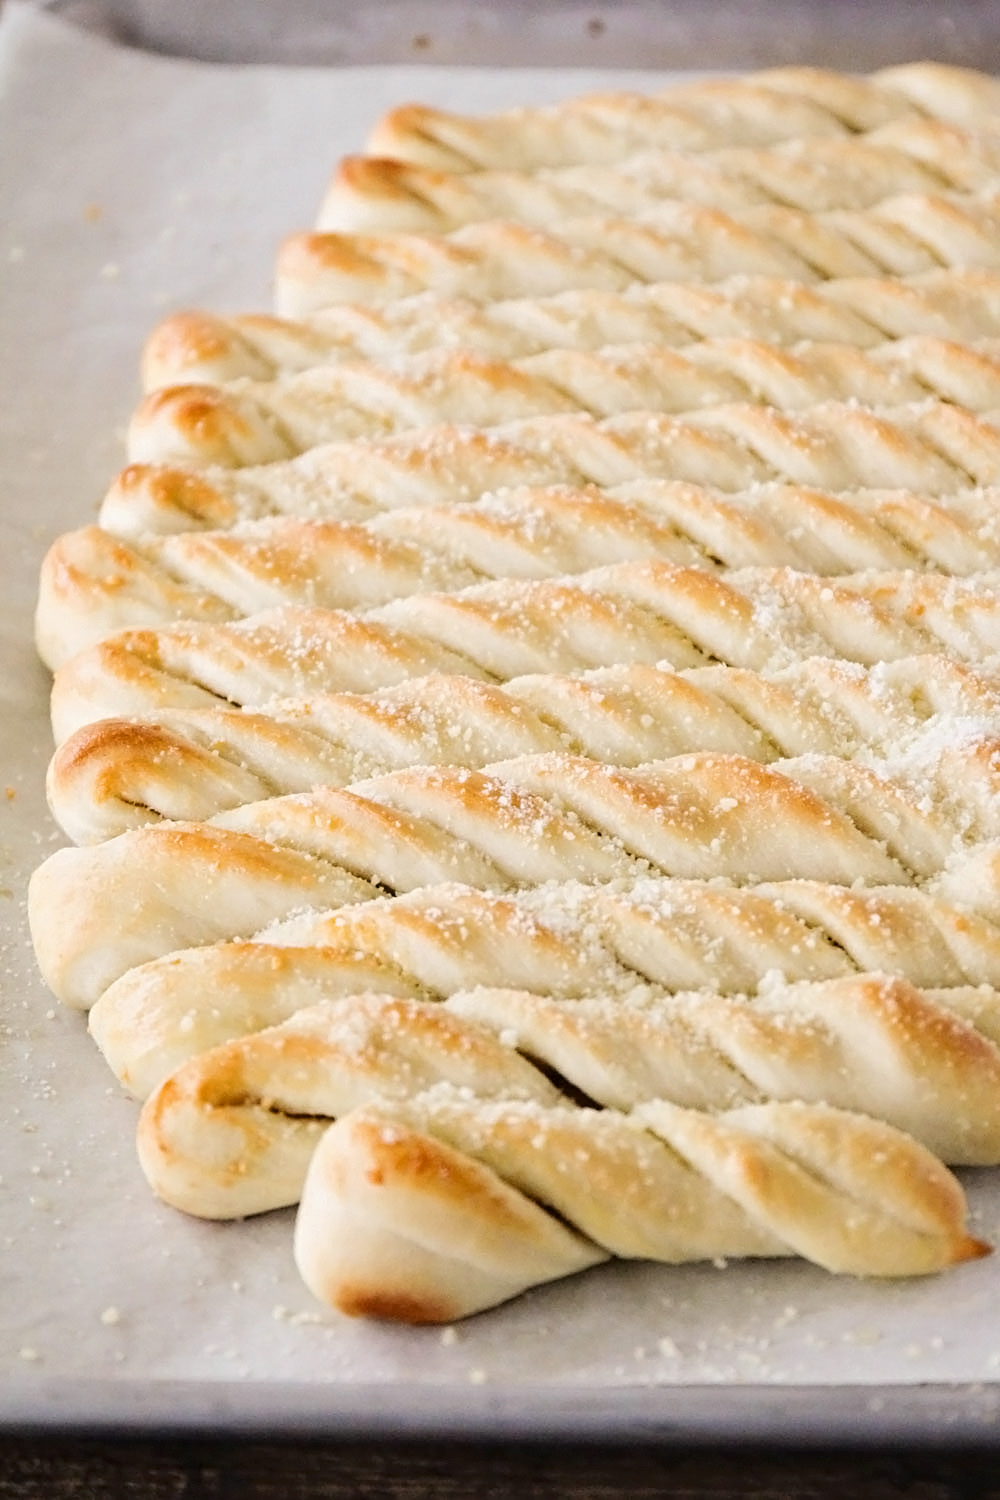 These garlic parmesan breadsticks are addictingly delicious, and ready in under 45 minutes!